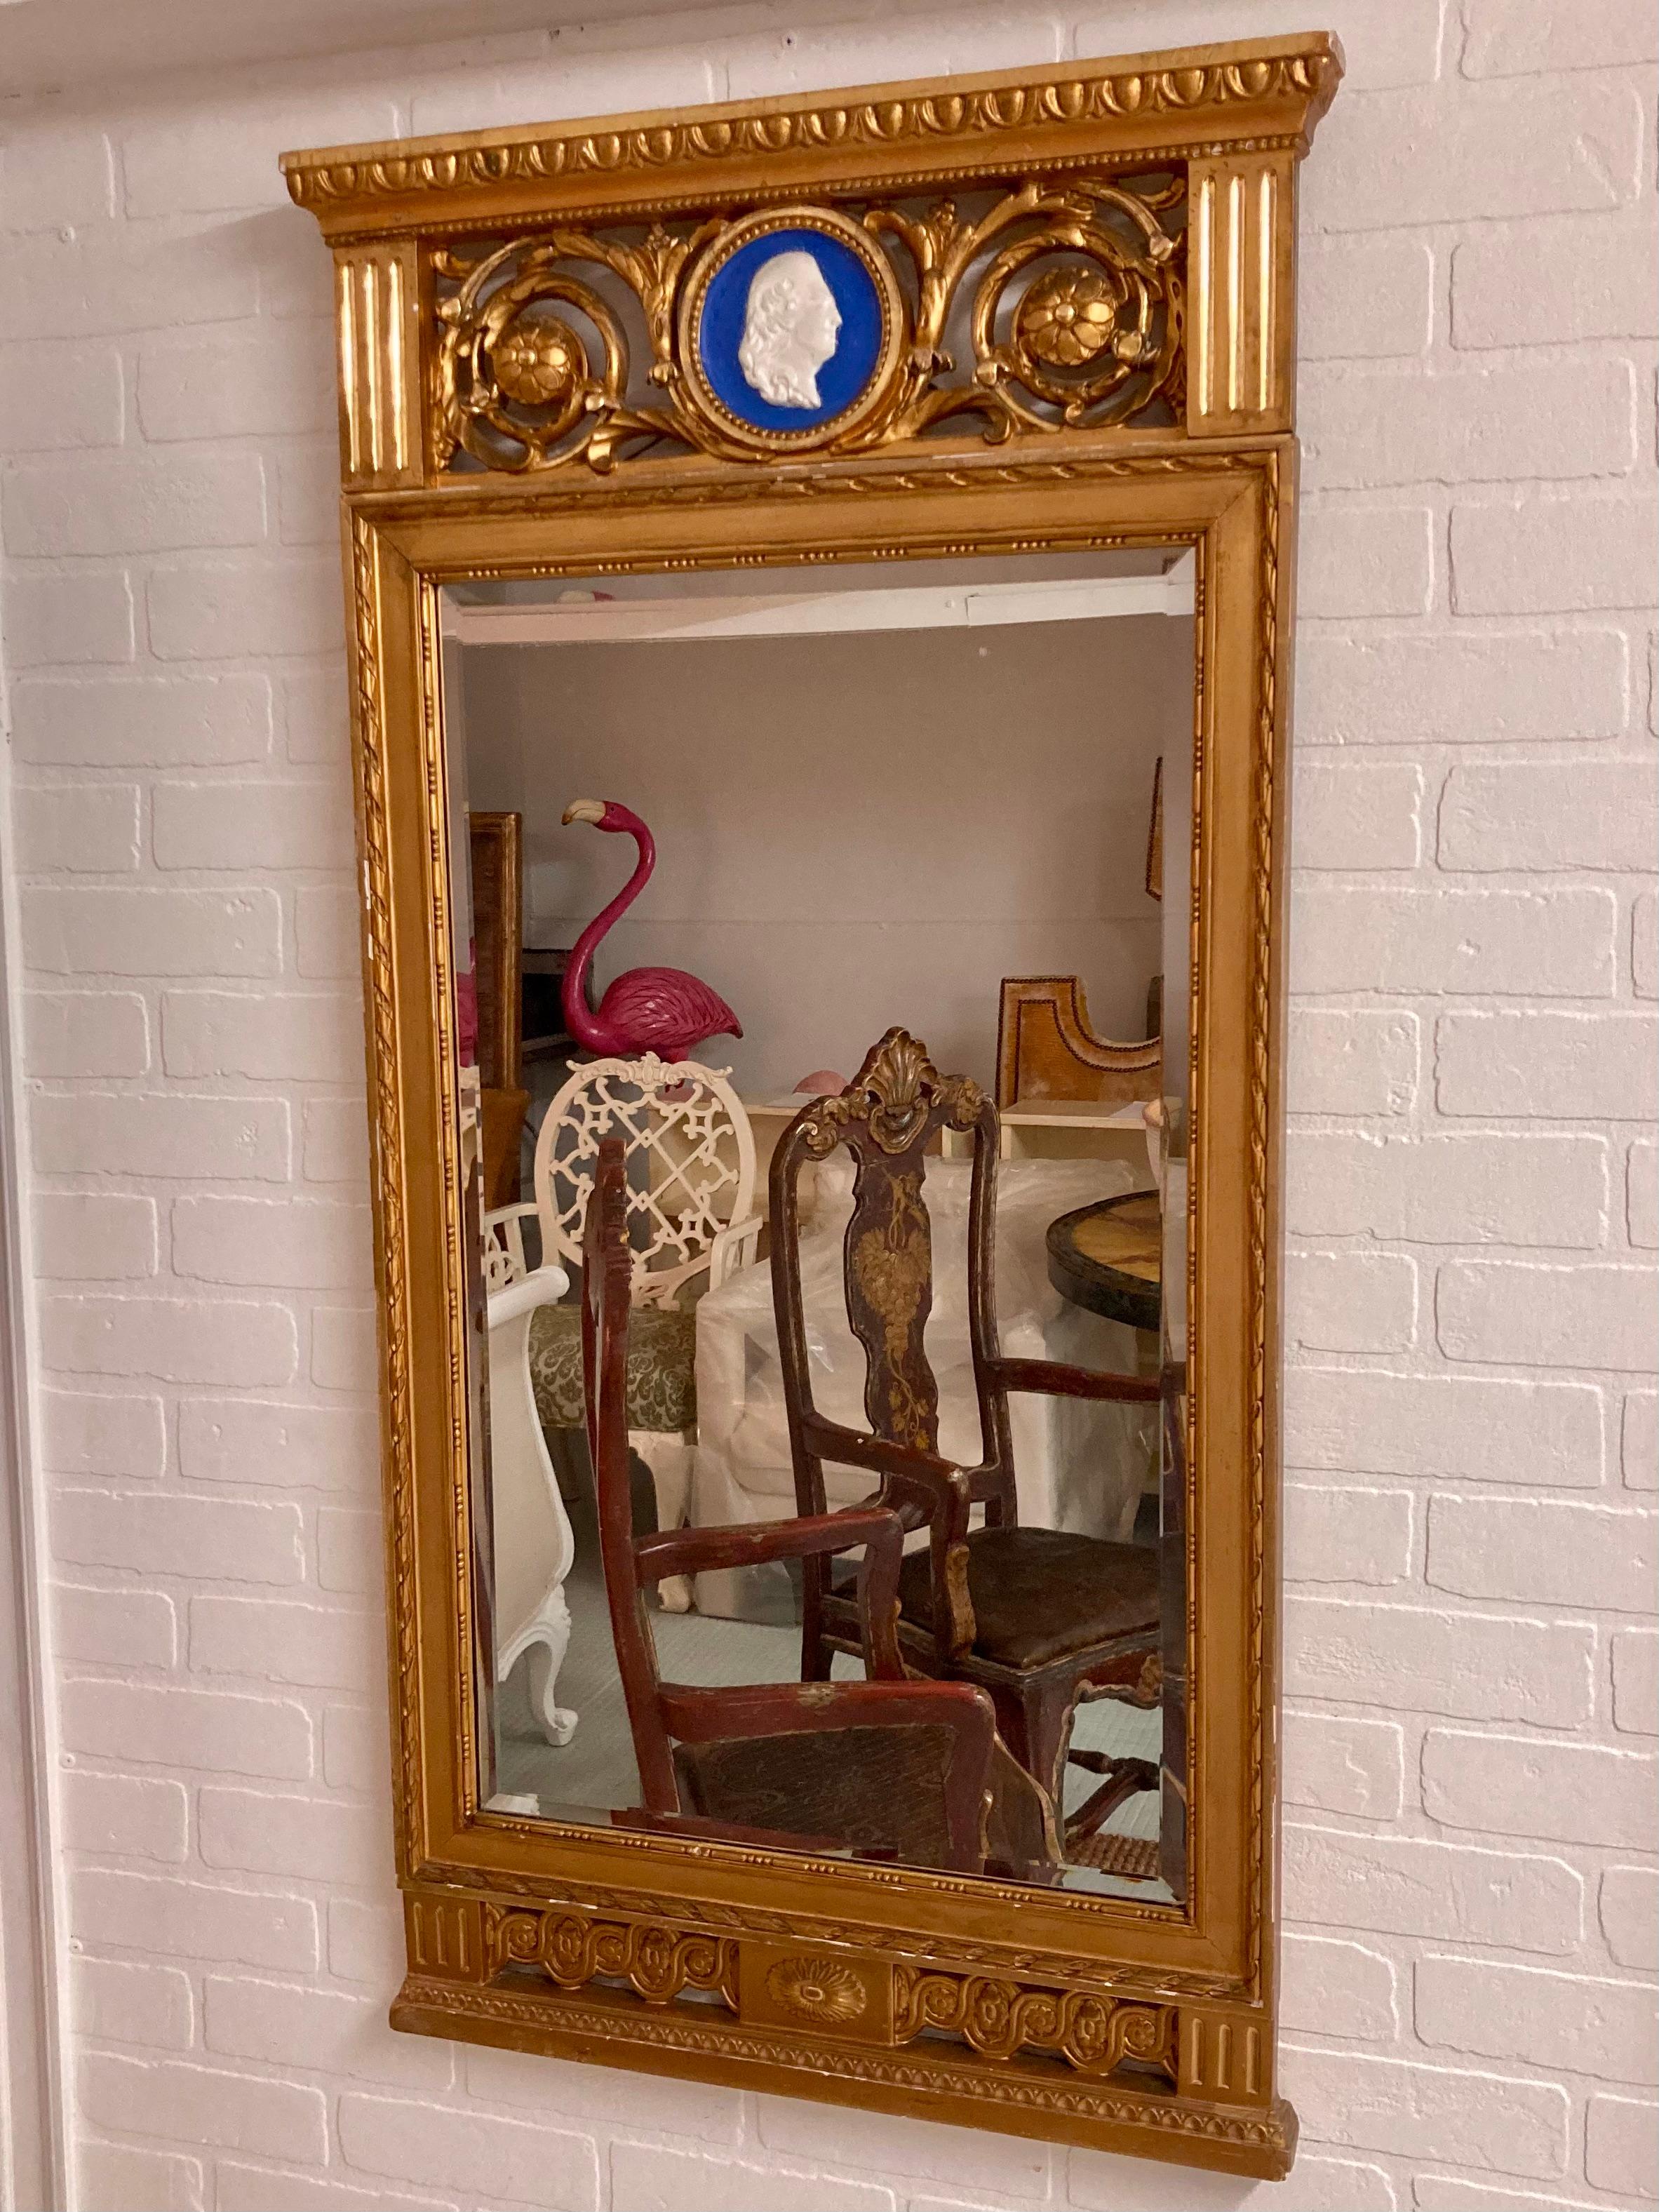 Beautiful French gilt classical mirror with wedgewood style plaque. Beatiful carving details and quality gilt finish. Add some French style to your home.